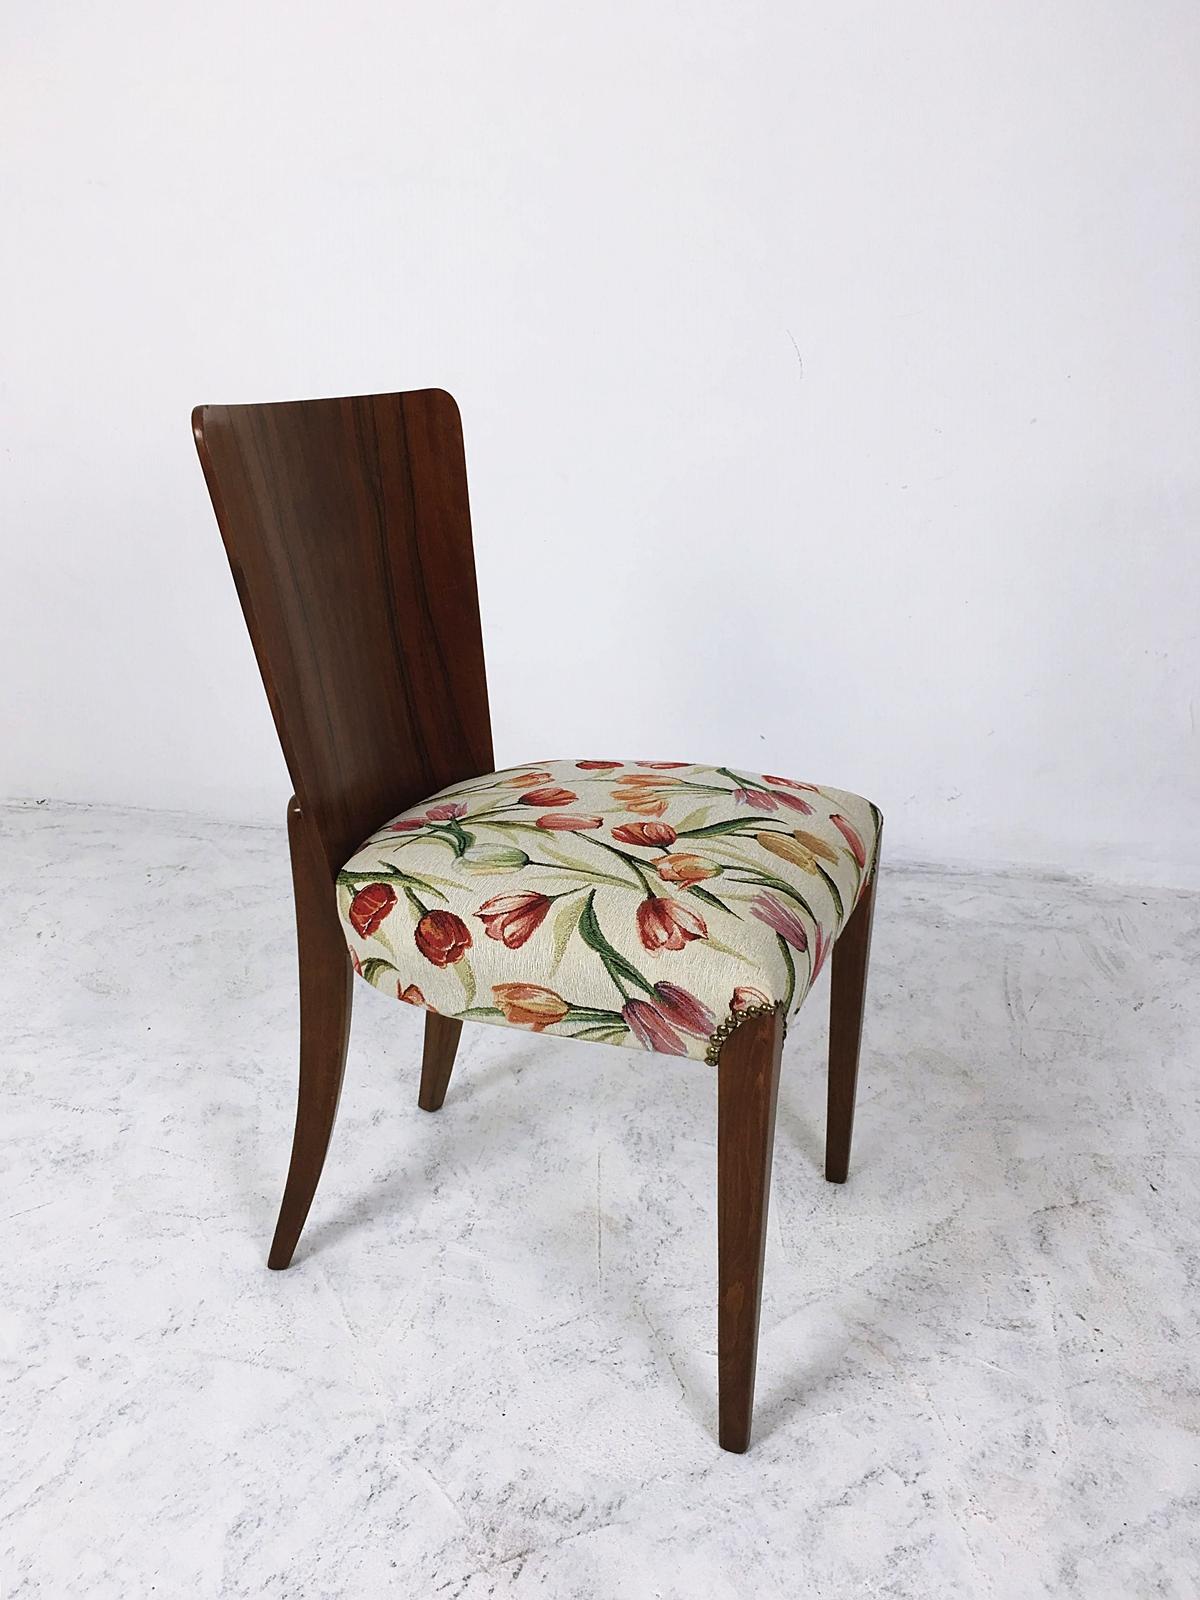 These Art Deco chairs, model H - 214, were designed by Jindrich Halabala and manufactured by Up Zavody in Czechoslovakia. The set features a beech frame with newly upholstered seats. The wood has been refreshed and the shape has been kept in every